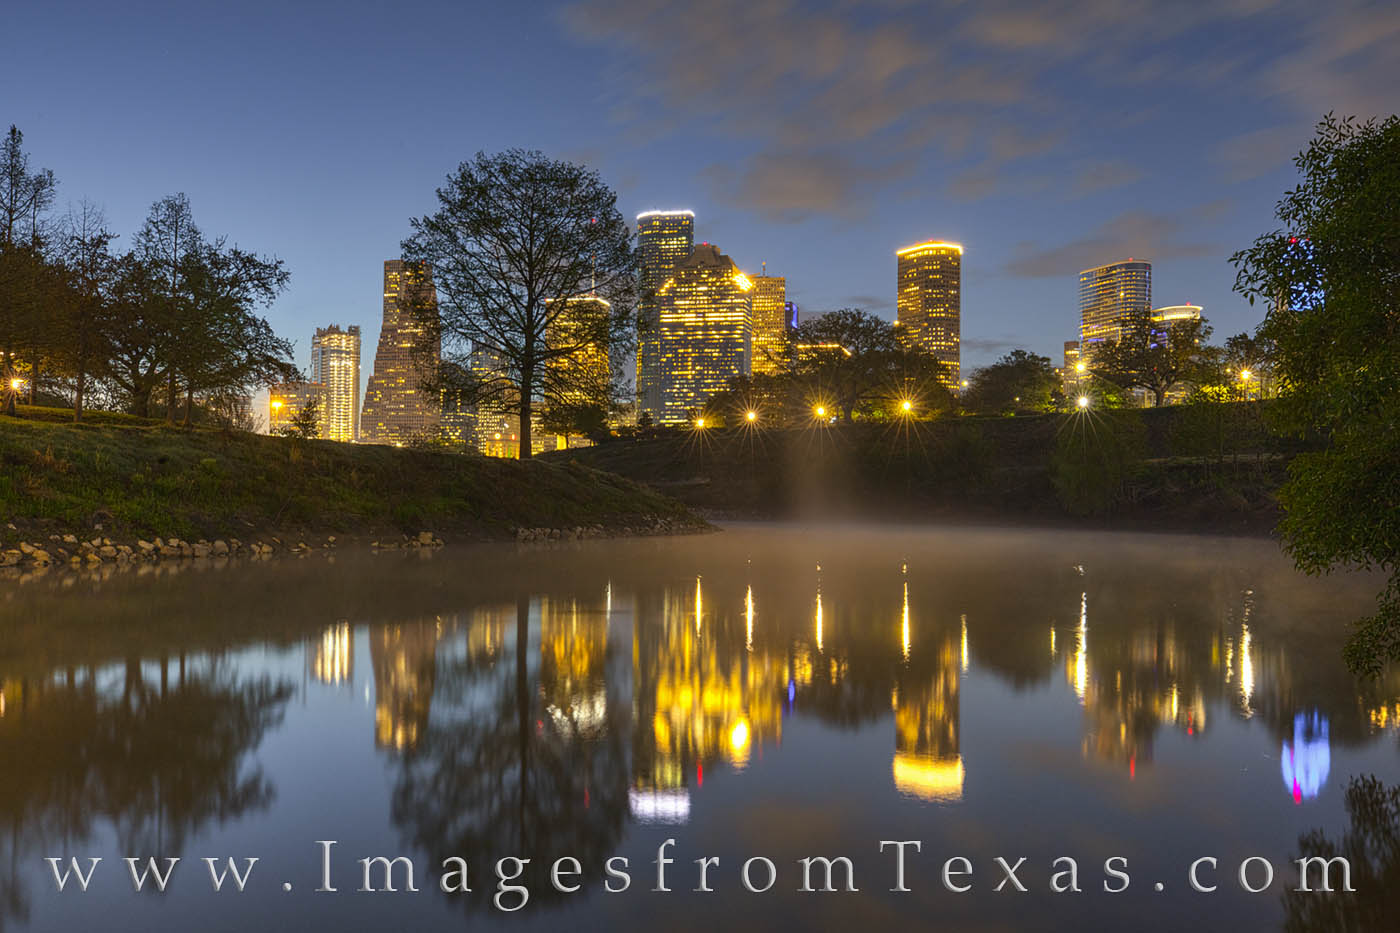 With a light fog rising from the still waterway of Buffalo Bayou, the reflection of the Houston skyline appears clear and colorful...